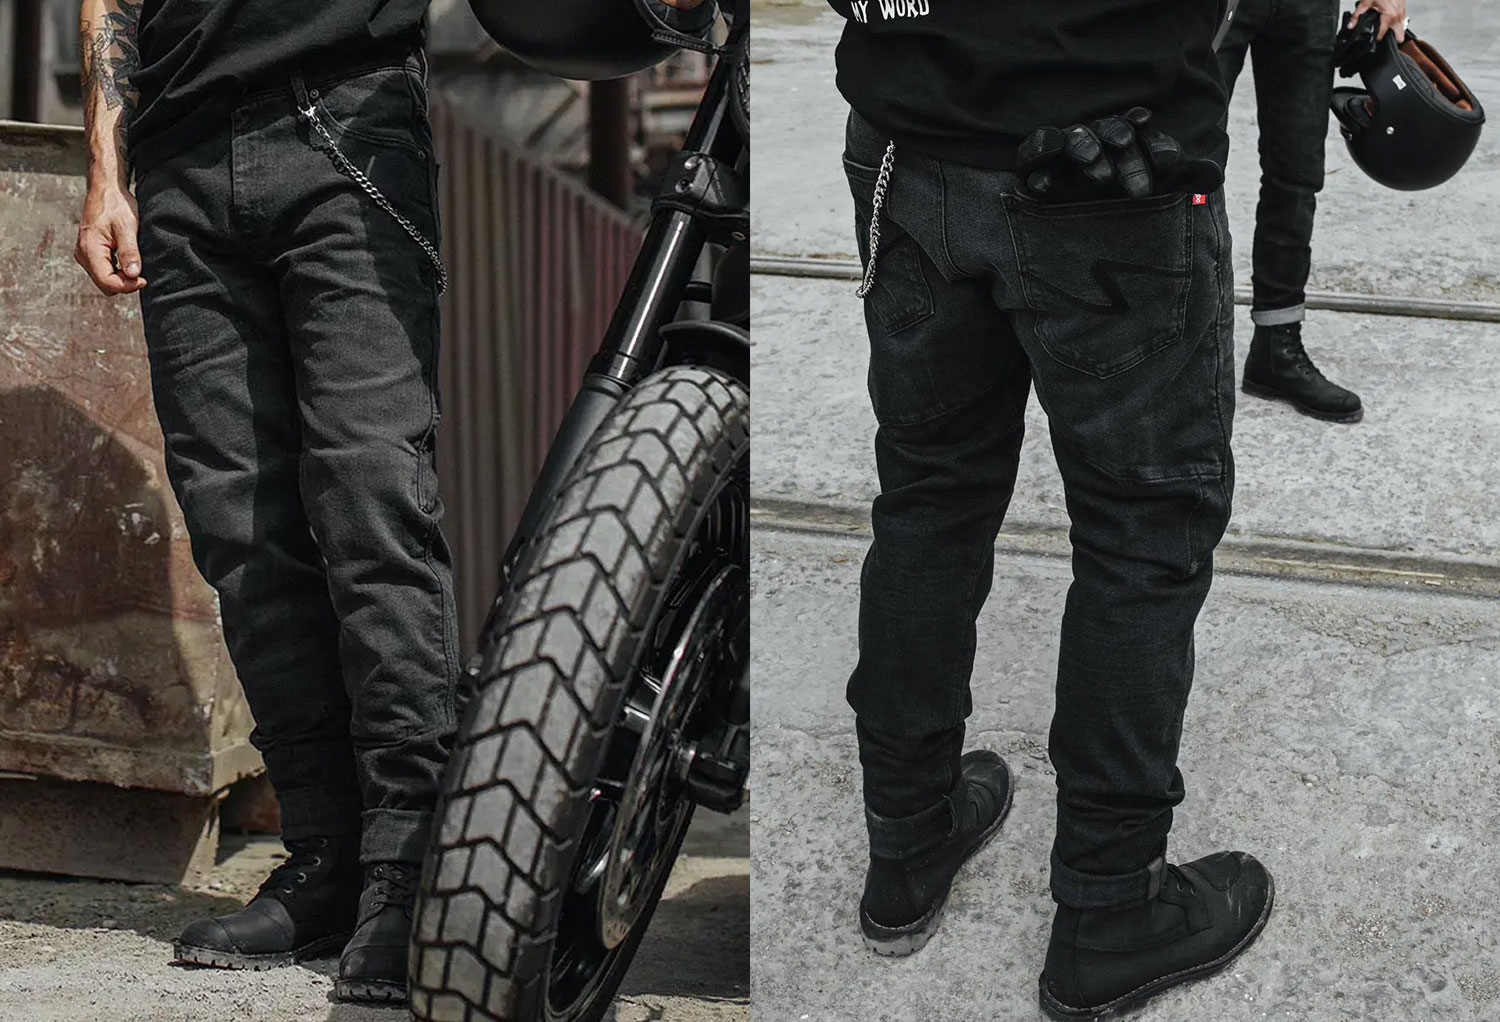 Dean SF Trousers | Ride-ready chinos for the stylish urban rider.